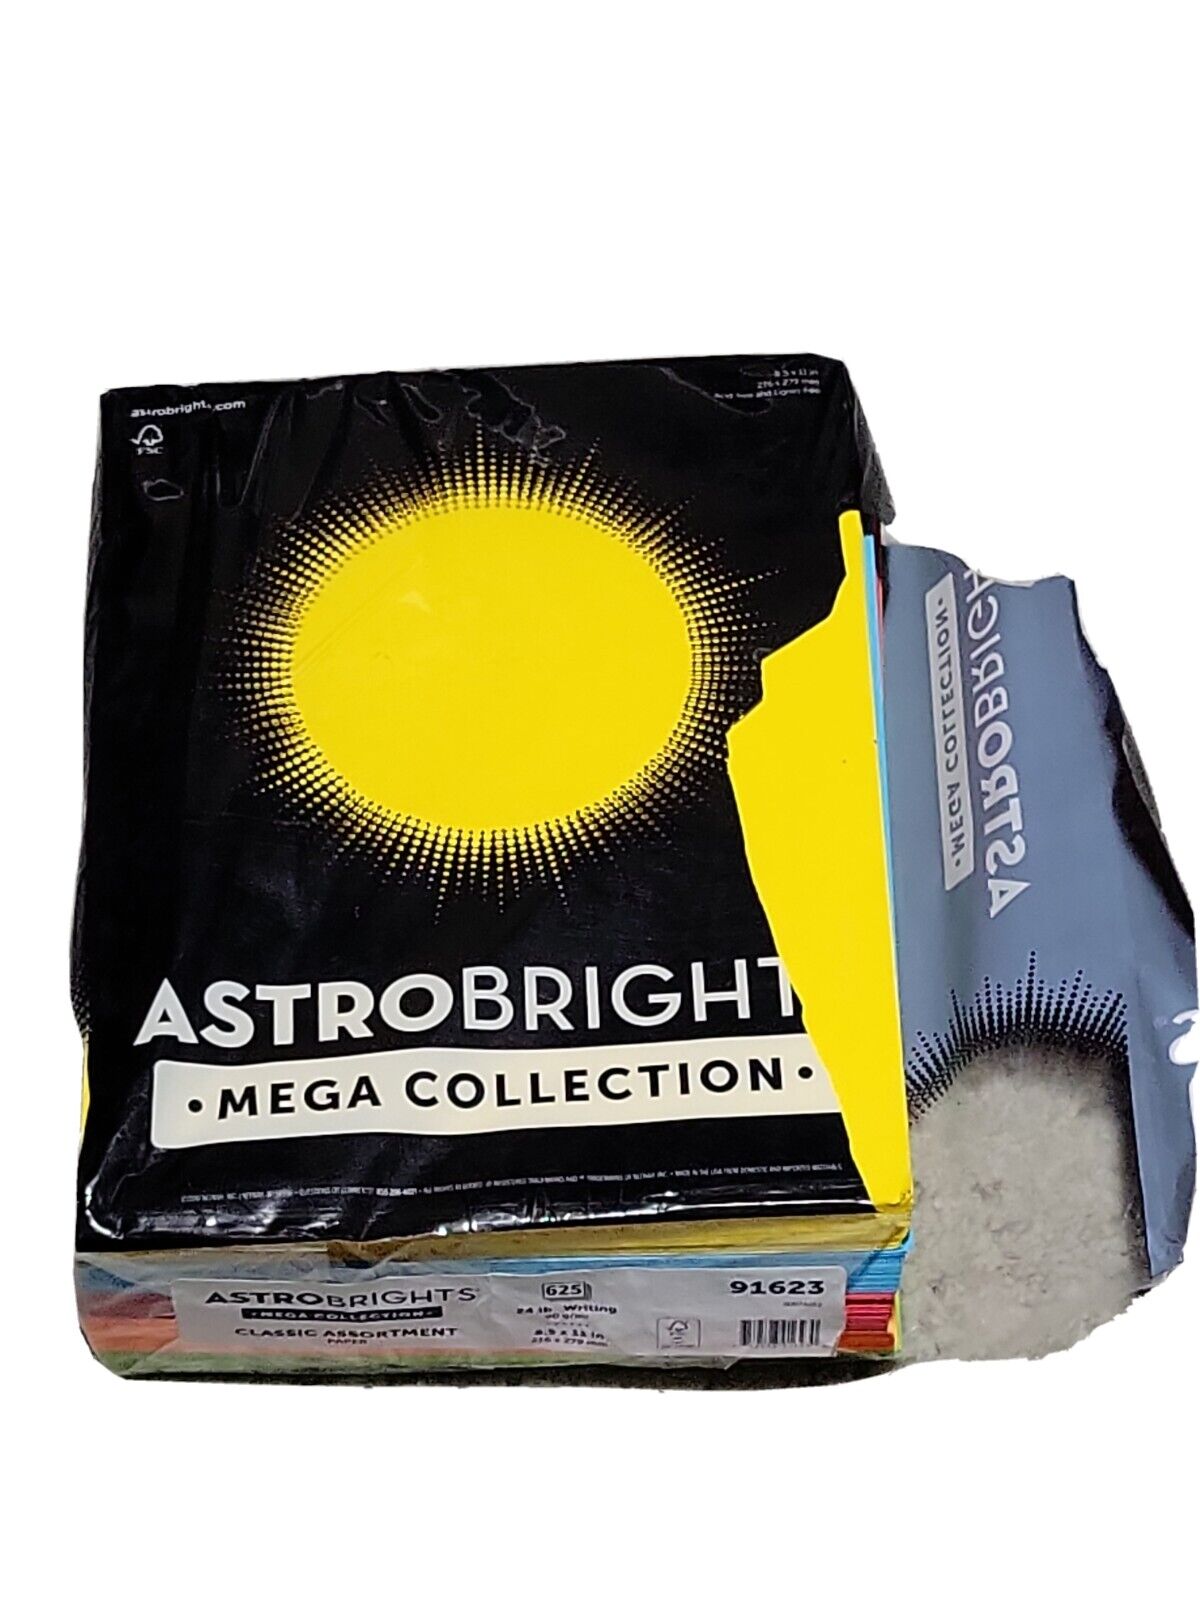 Astrobrights Mega Collection, Colored Cardstock,"classic" 5-color Assortment,...